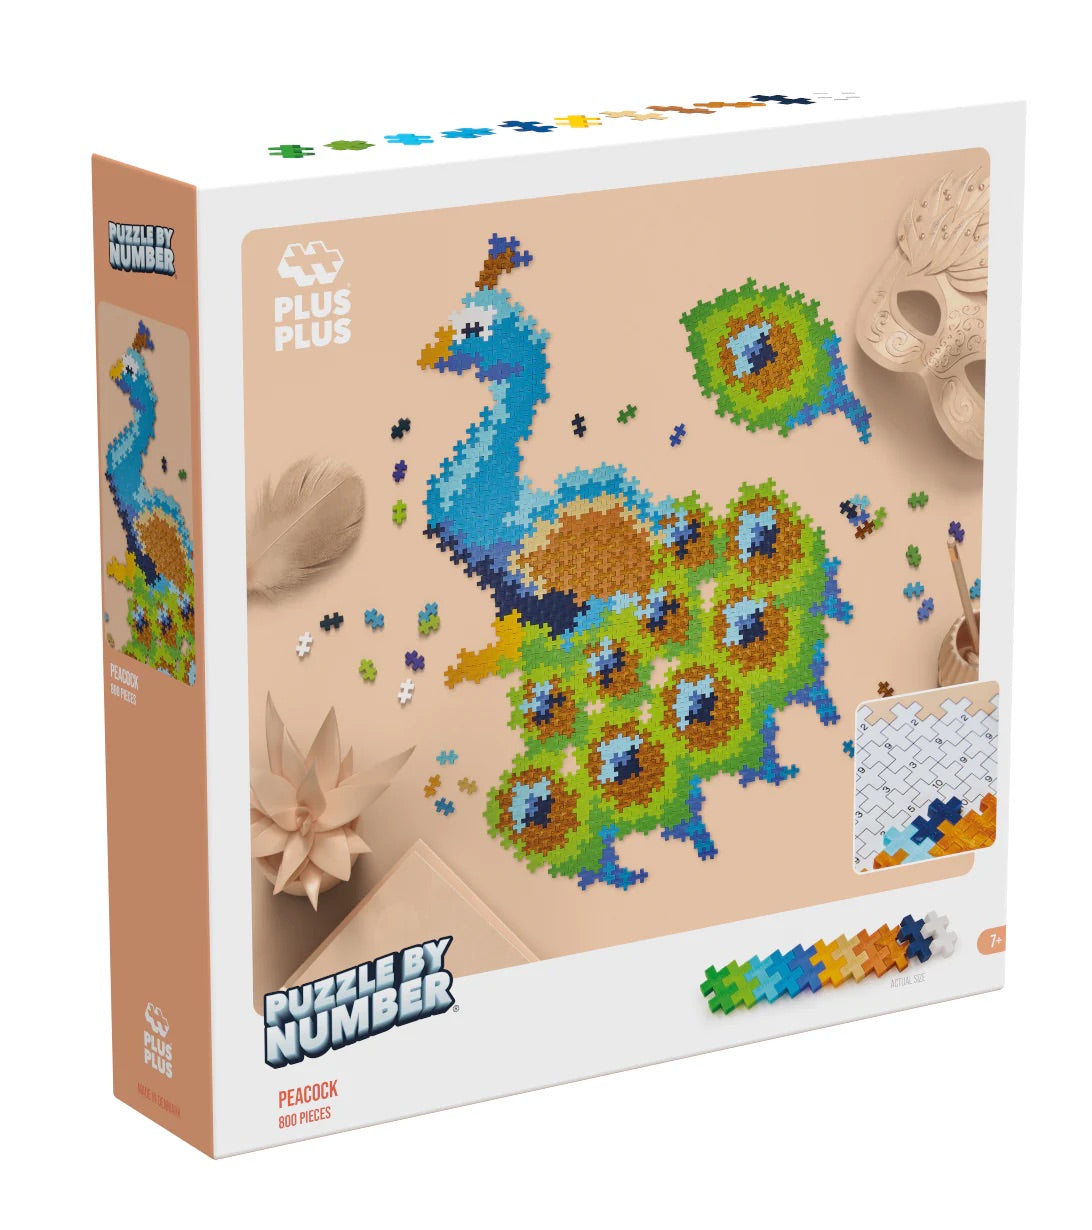 Puzzle by Number - 800 pc Peacock